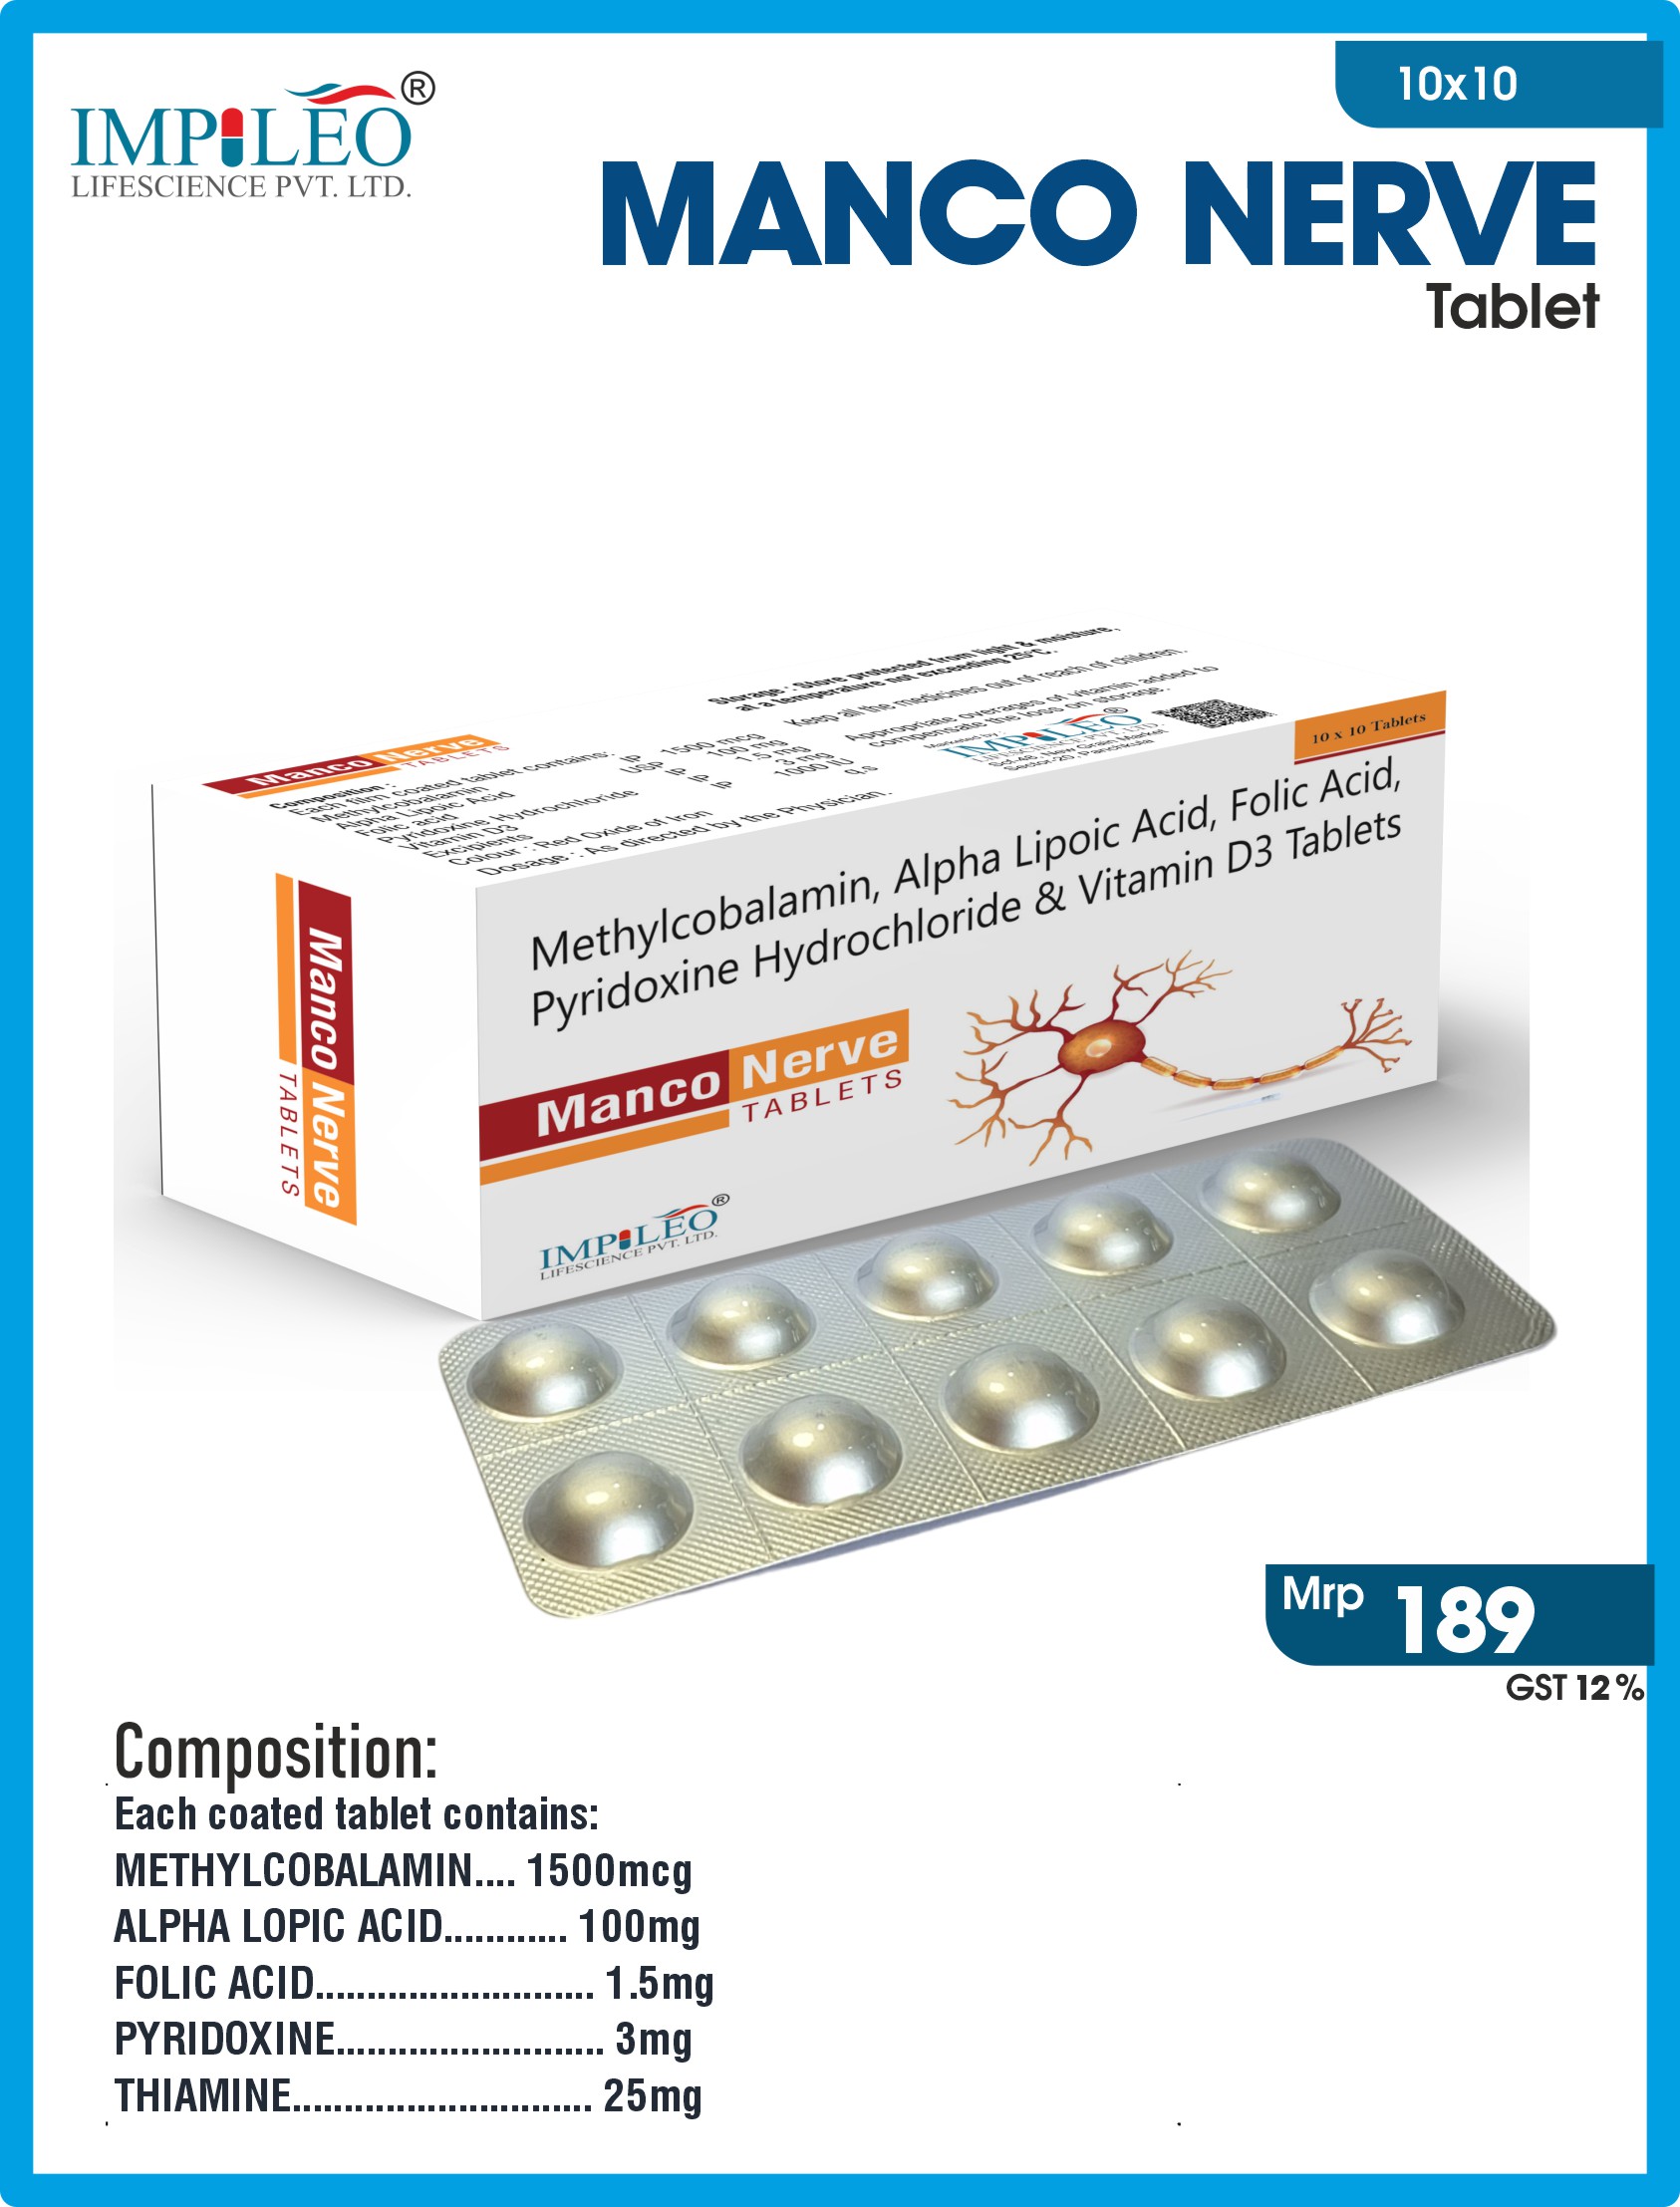 Seize the Opportunity: PCD Pharma Franchise in Chandigarh Now Includes MANCO NERVE Tablet